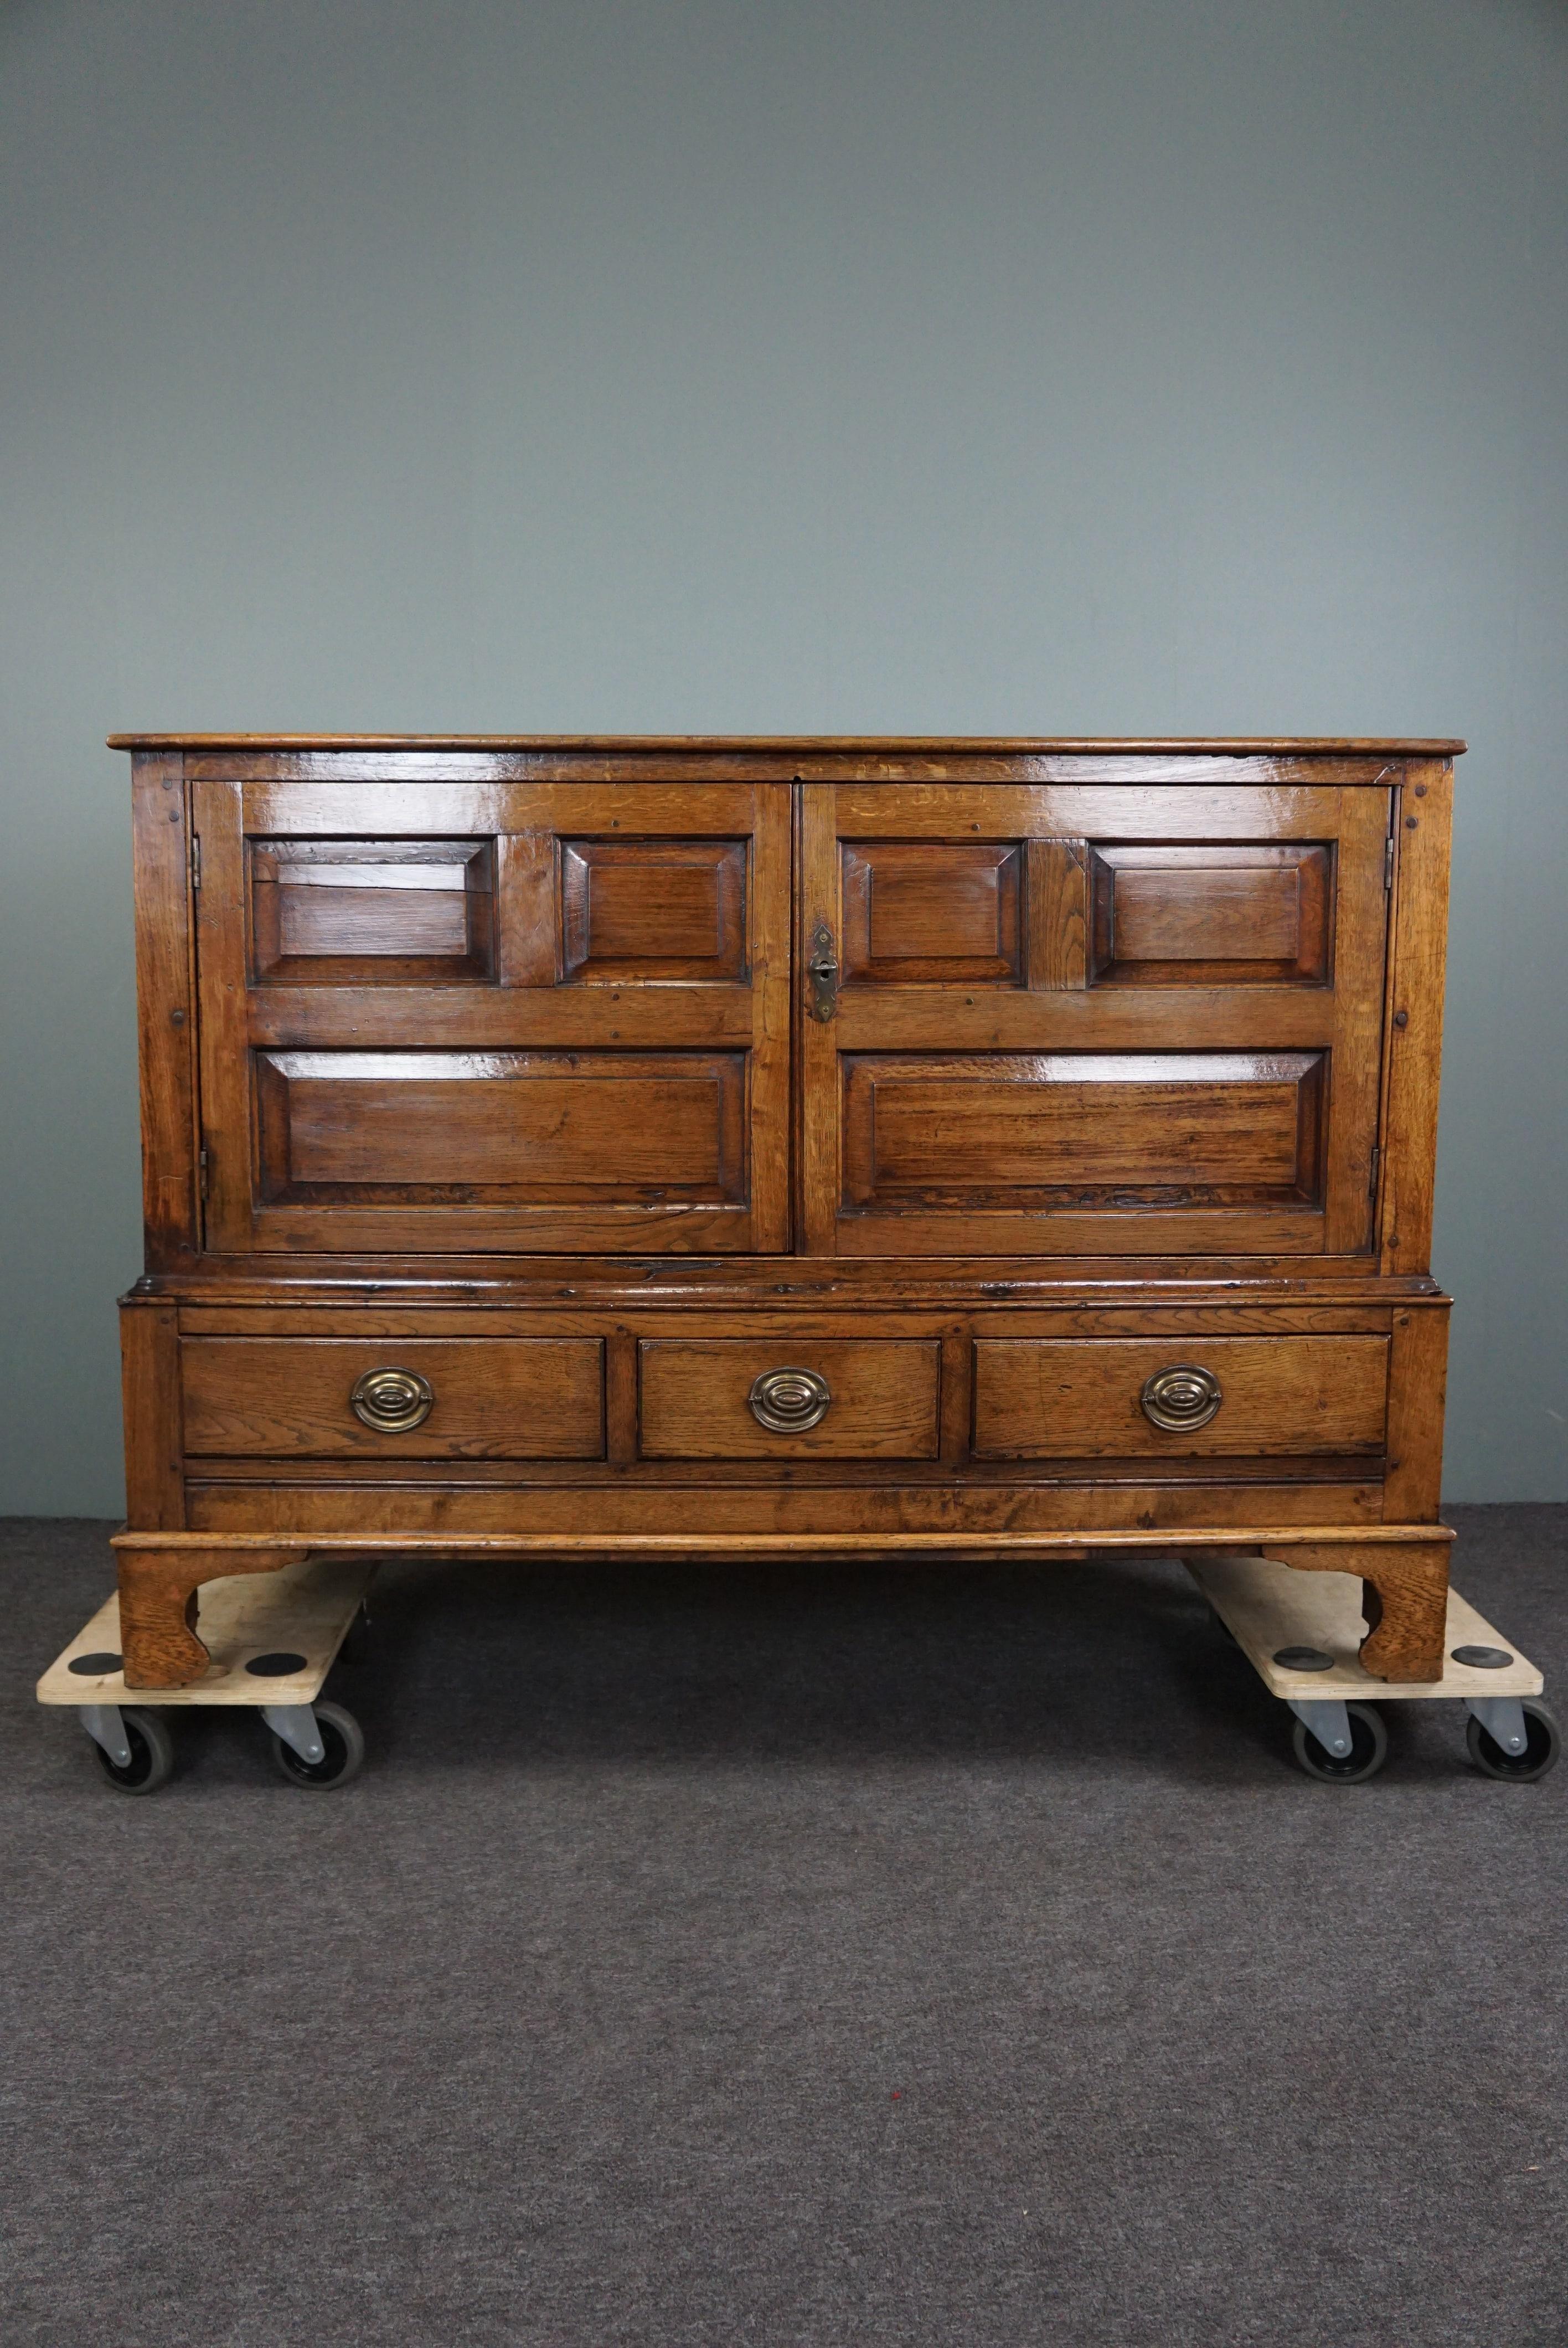 Offered this amazing piece of furniture from Wales with beautiful rich colors and patina and stunning charm.

With its beautiful details and very elegant appearance, this cabinet is a true eye-catcher in your interior.

This attractive warm-colored